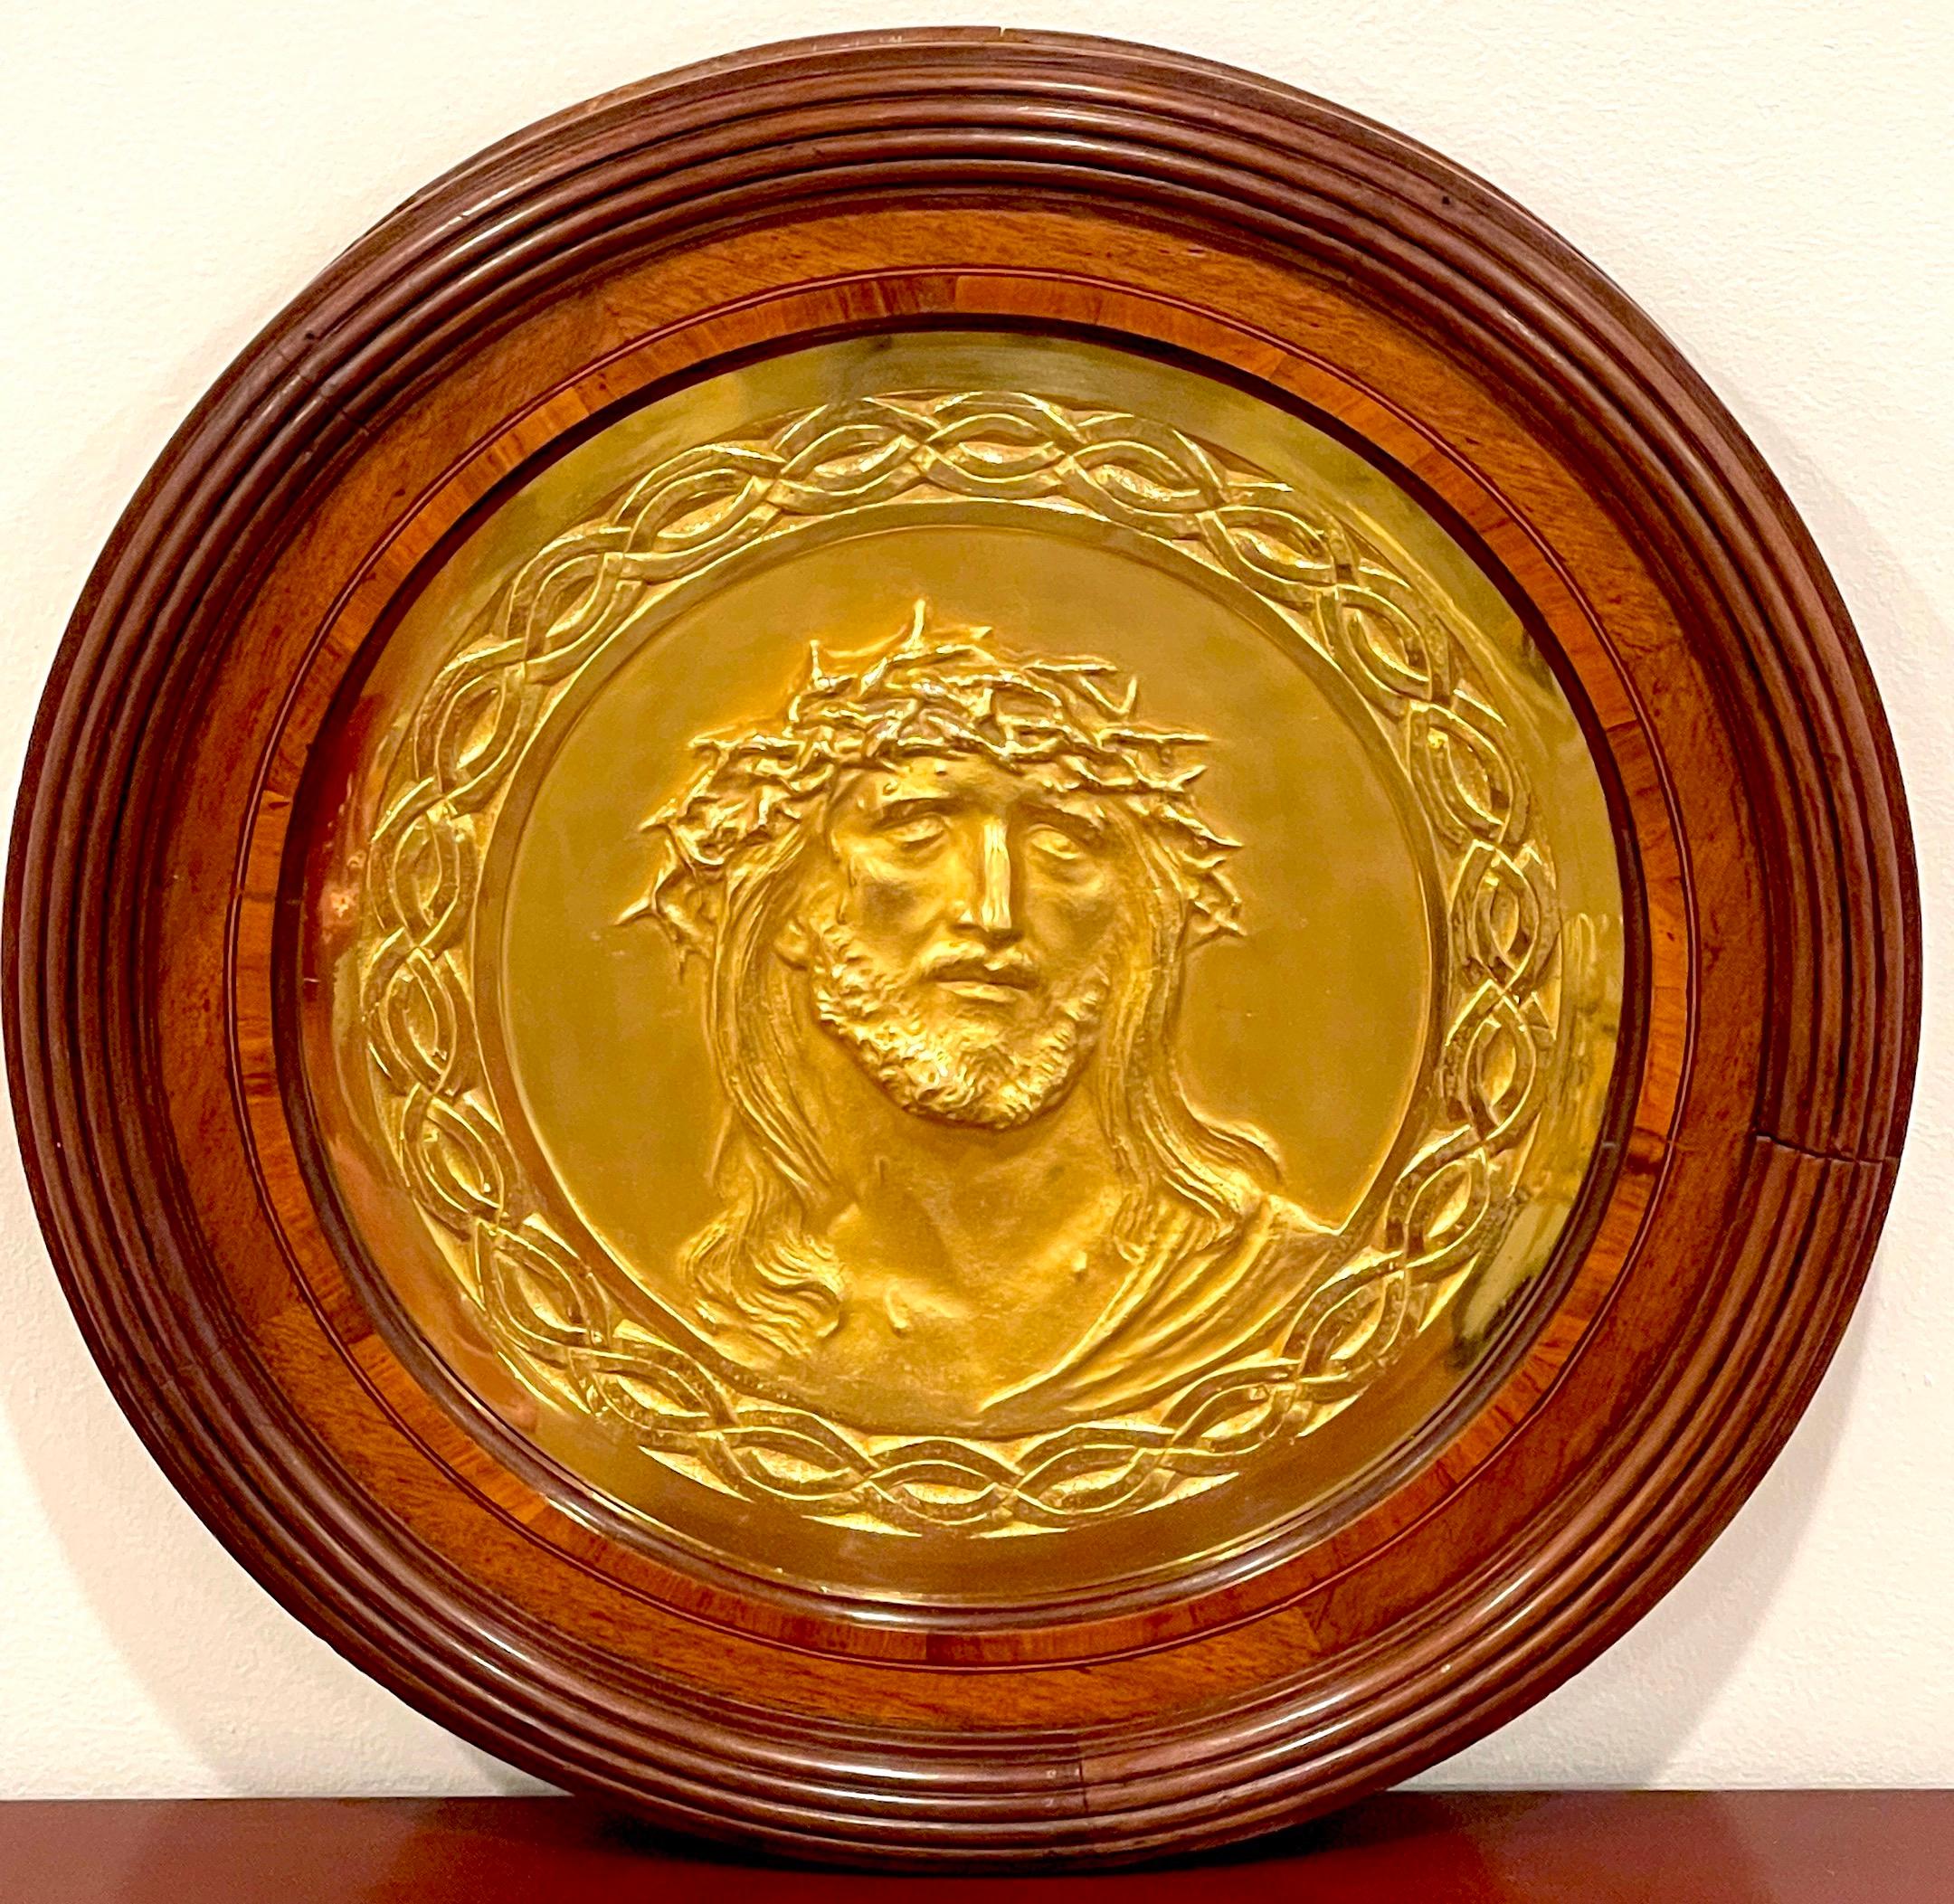 19th century French Gilt Bronze Portrait Plaque of Jesus with Crown of Thorns 
France, circa 1890s

Of circular form a finely cast portrait of Jesus with the crown of thorns placed on the his head during the events leading up to his crucifixion.